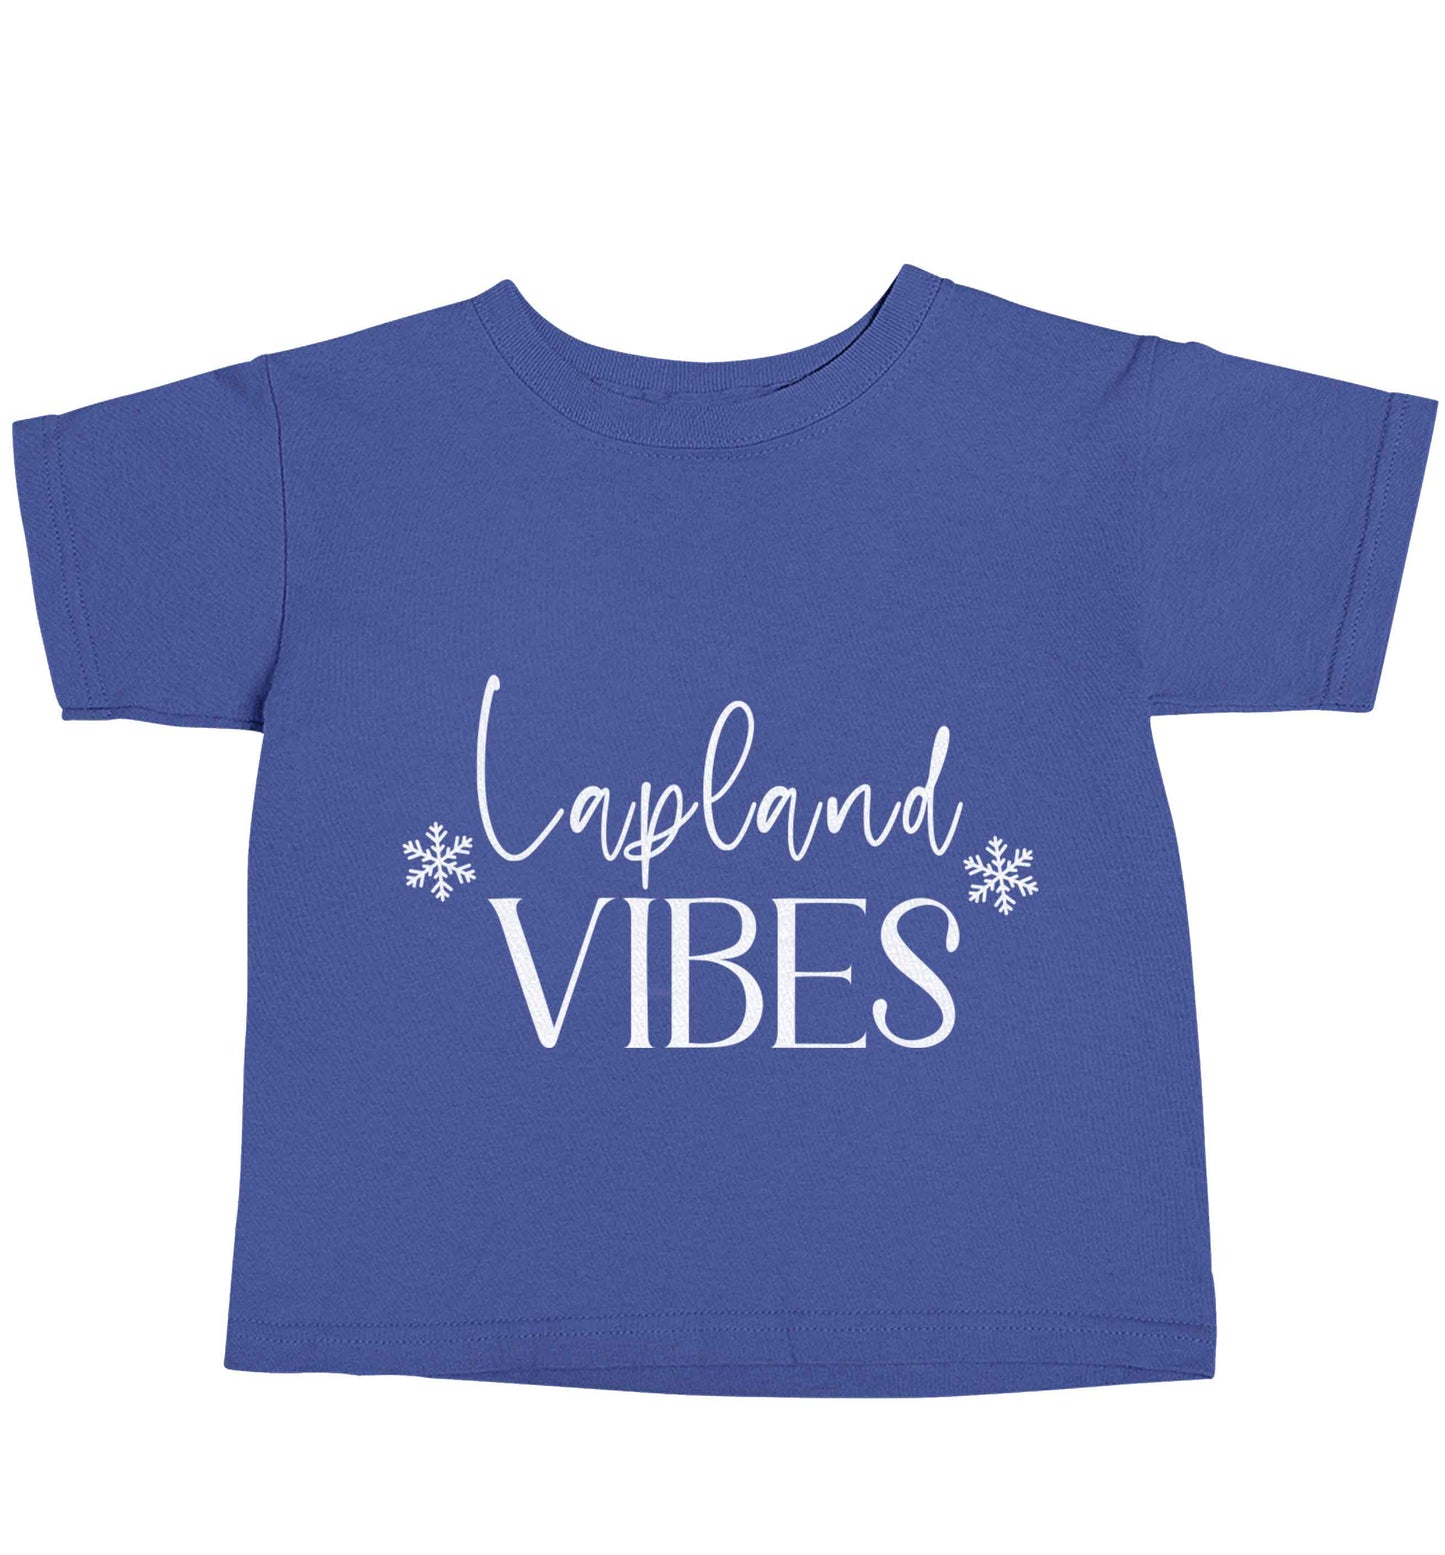 Lapland vibes blue baby toddler Tshirt 2 Years